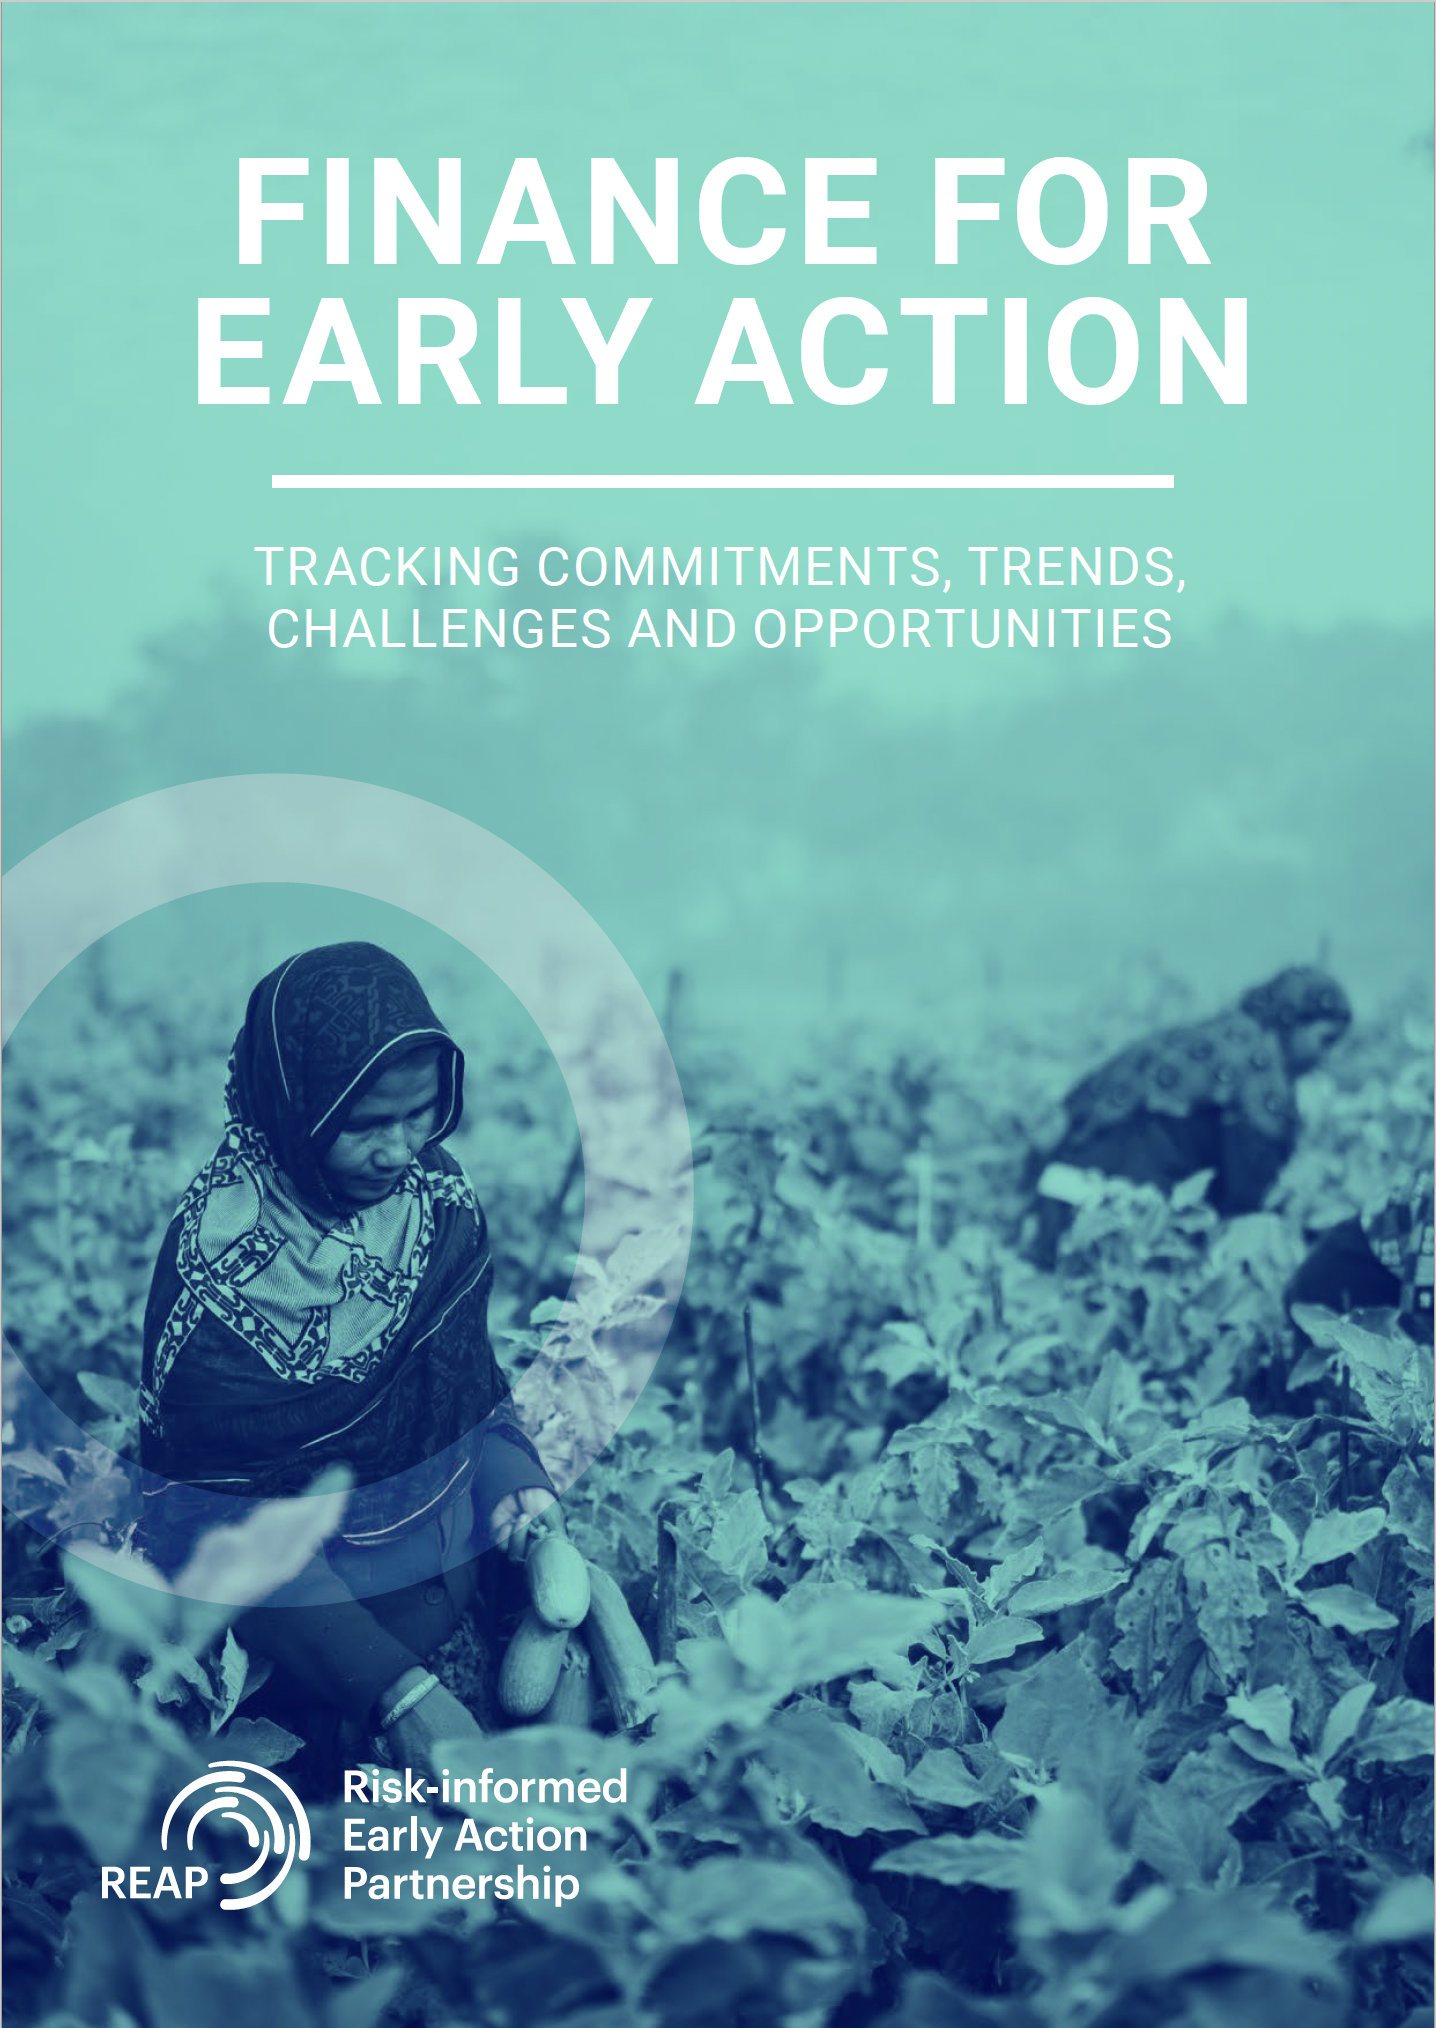 Finance for Early Action: Tracking Commitments, Trends, Challenges and Opportunities